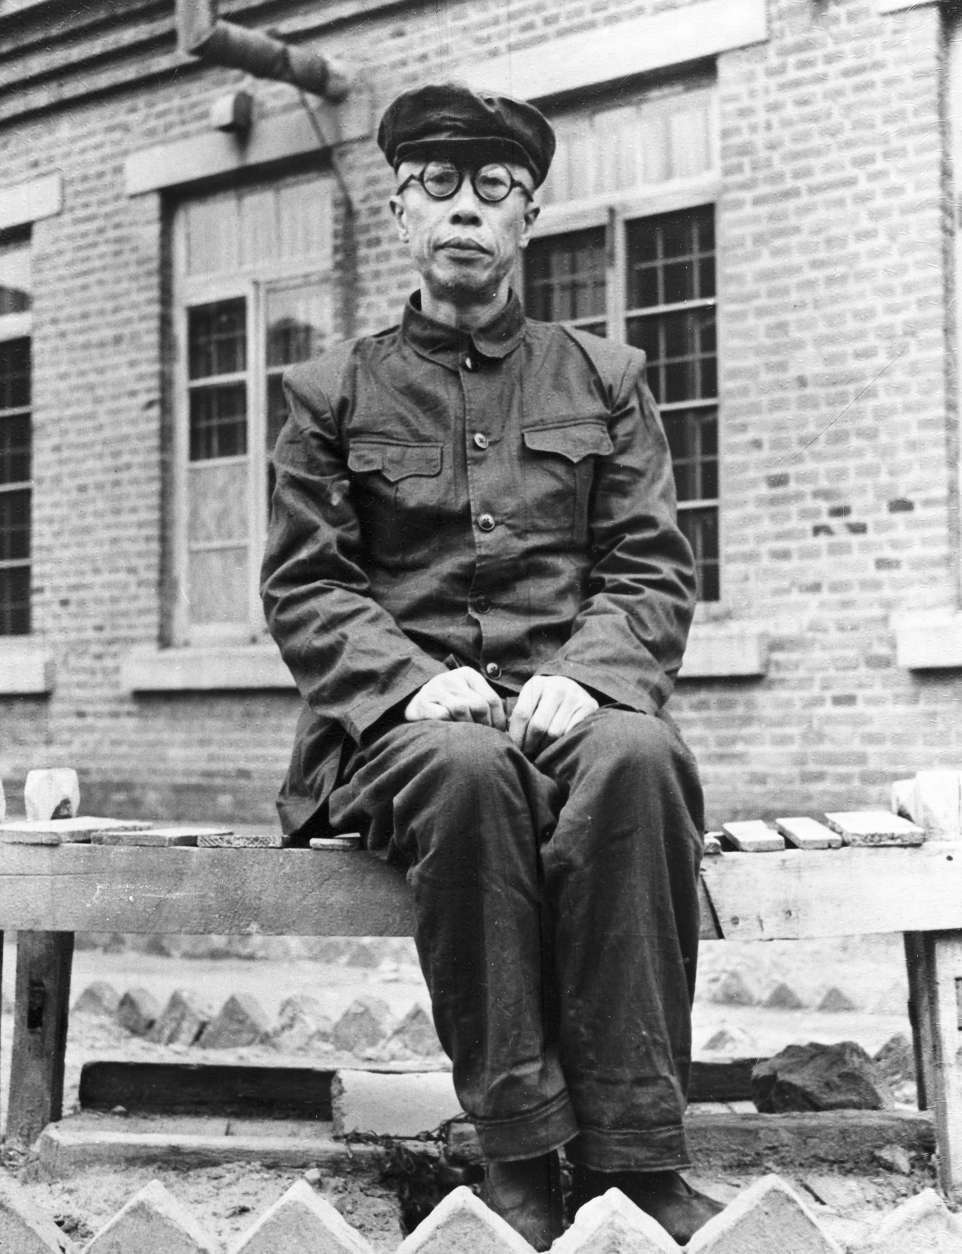 50-year-old Henry Pu-Yi, the last Manchu emperor of China, seen in a Communist prison in Fushan, China, Dec. 28, 1956, where he has spent the last 11 yaers of his life. (AP Photo)